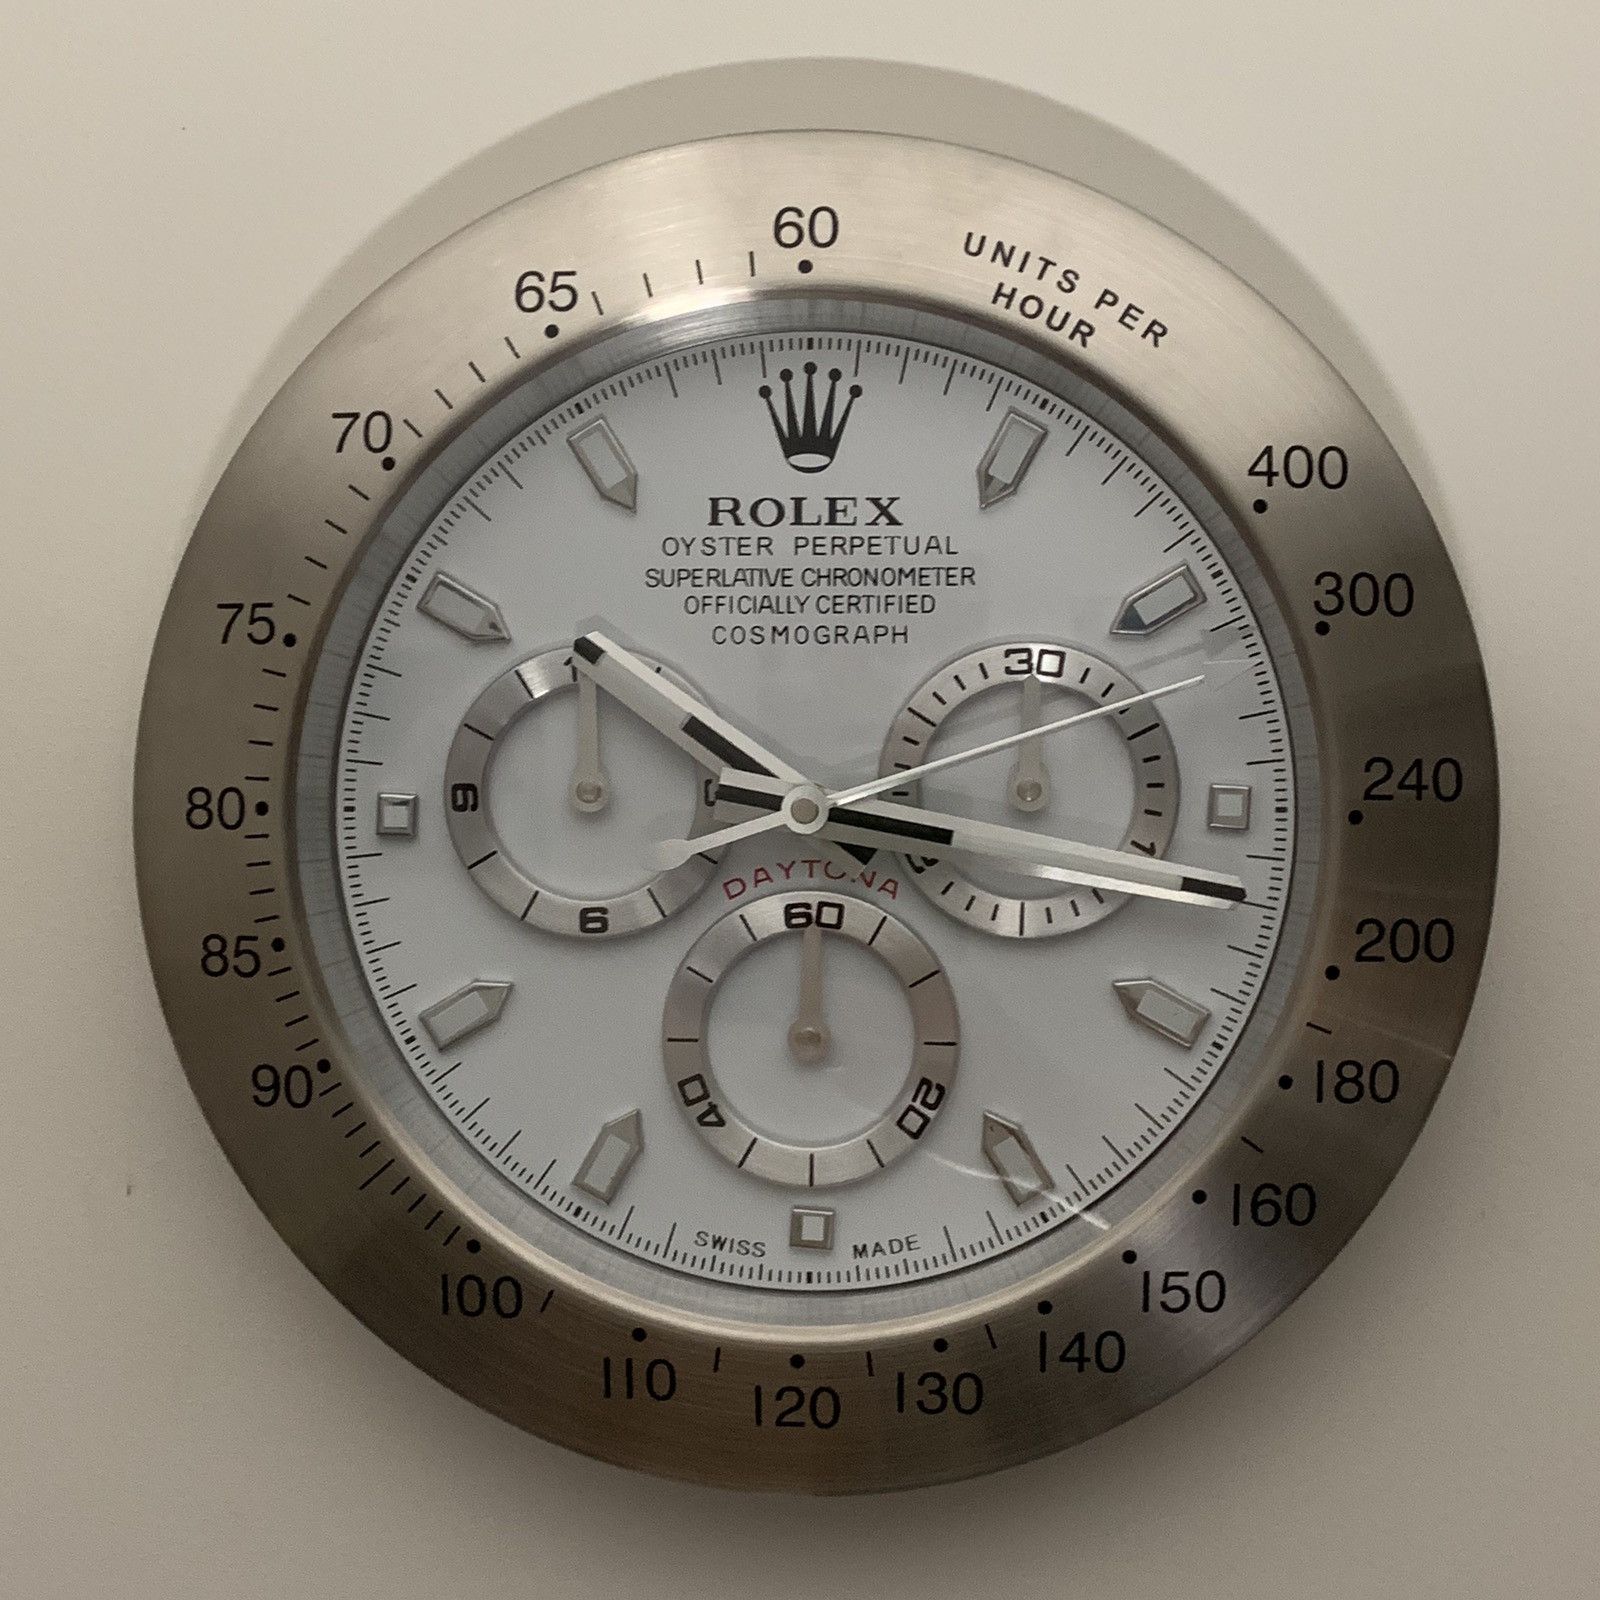 Rolex Rolex Oyster Perpetual Daytona Wall Clock Size ONE SIZE - 1 Preview